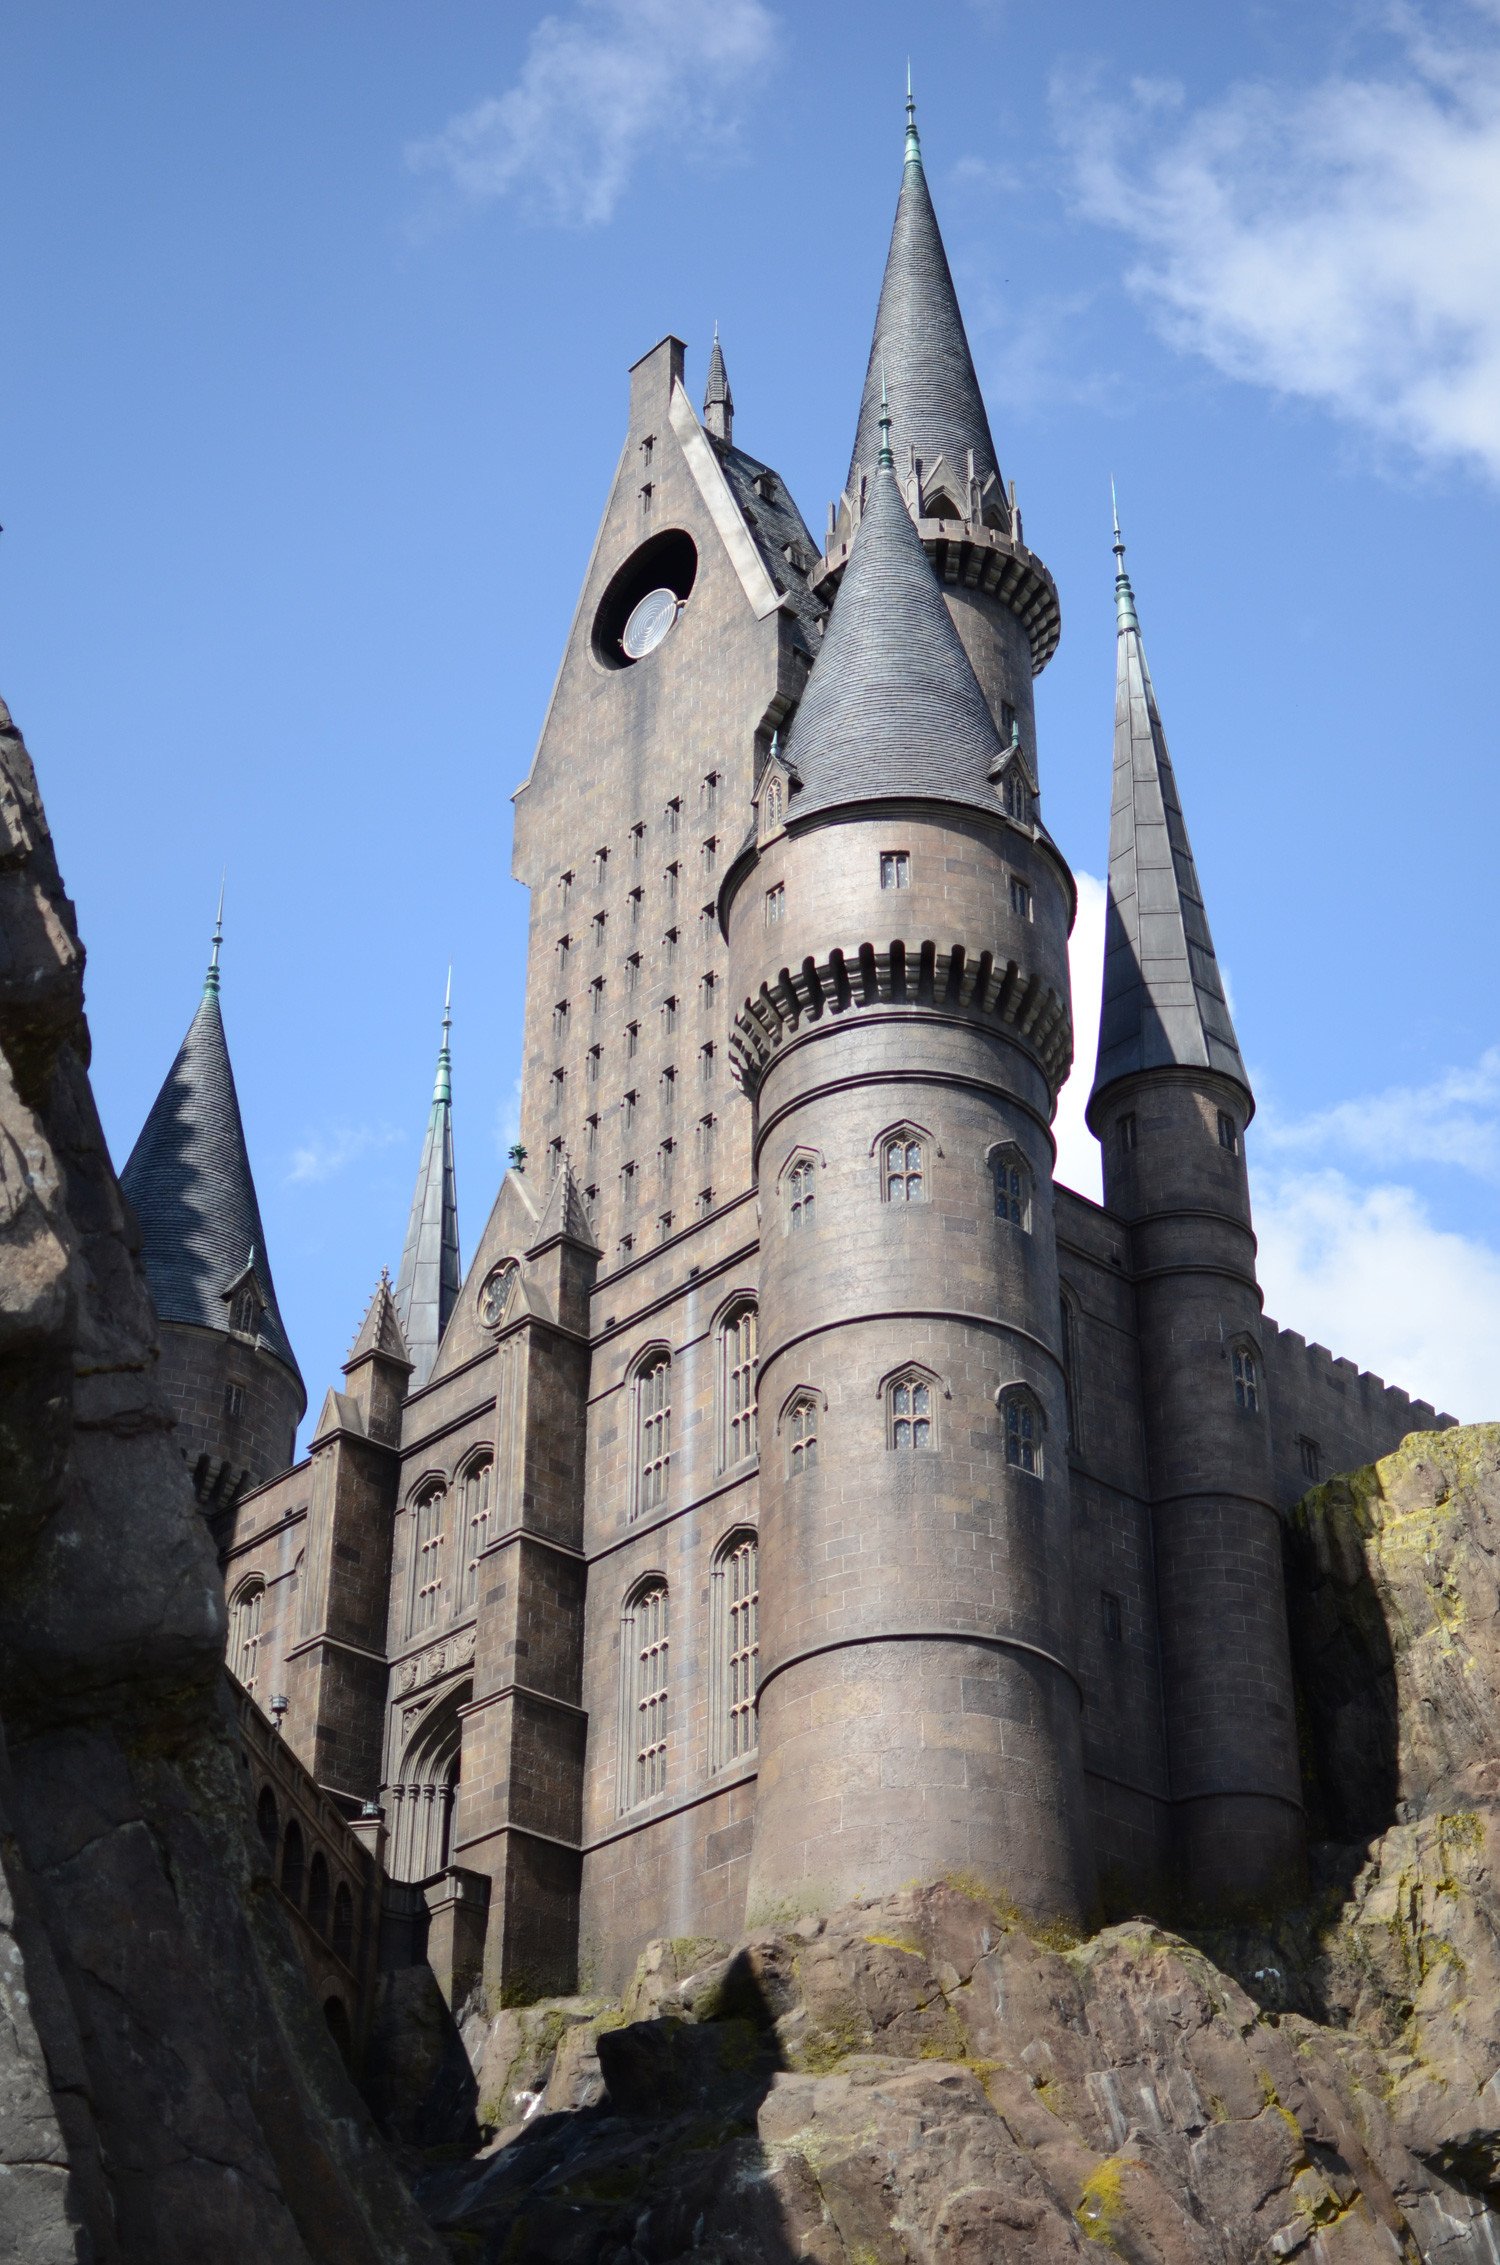 Hogwarts Castle at The Wizarding World of Harry Potter at Universal Studios, Florida